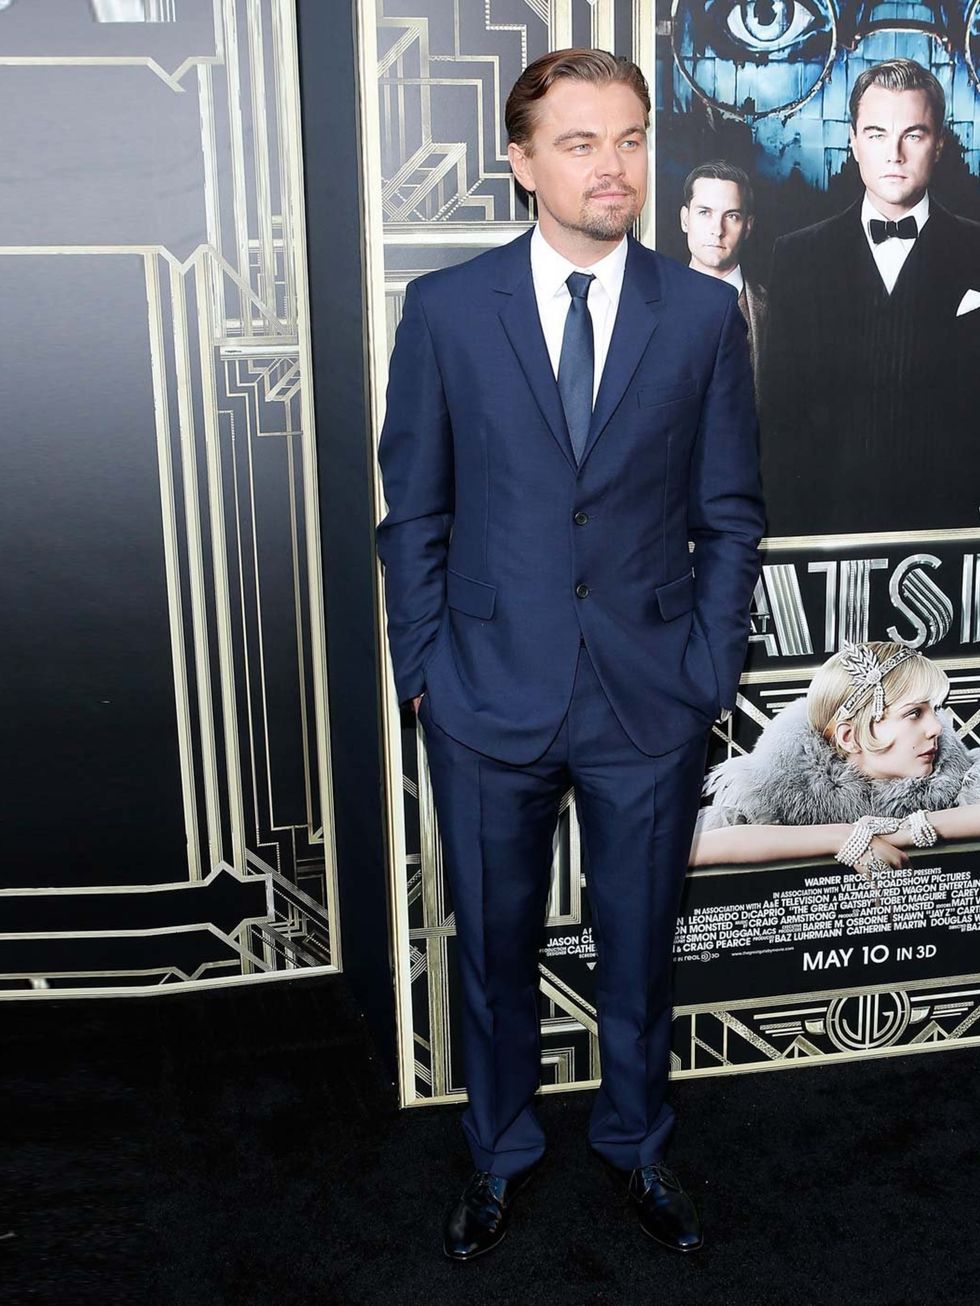 <p><a href="http://www.elleuk.com/star-style/celebrity-style-files/leonardo-dicaprio-man-of-the-week-in-pictures">Leonardo DiCaprio</a>, who plays the eponymous Jay Gatsby, opted for a navy suit and matching tie.</p>